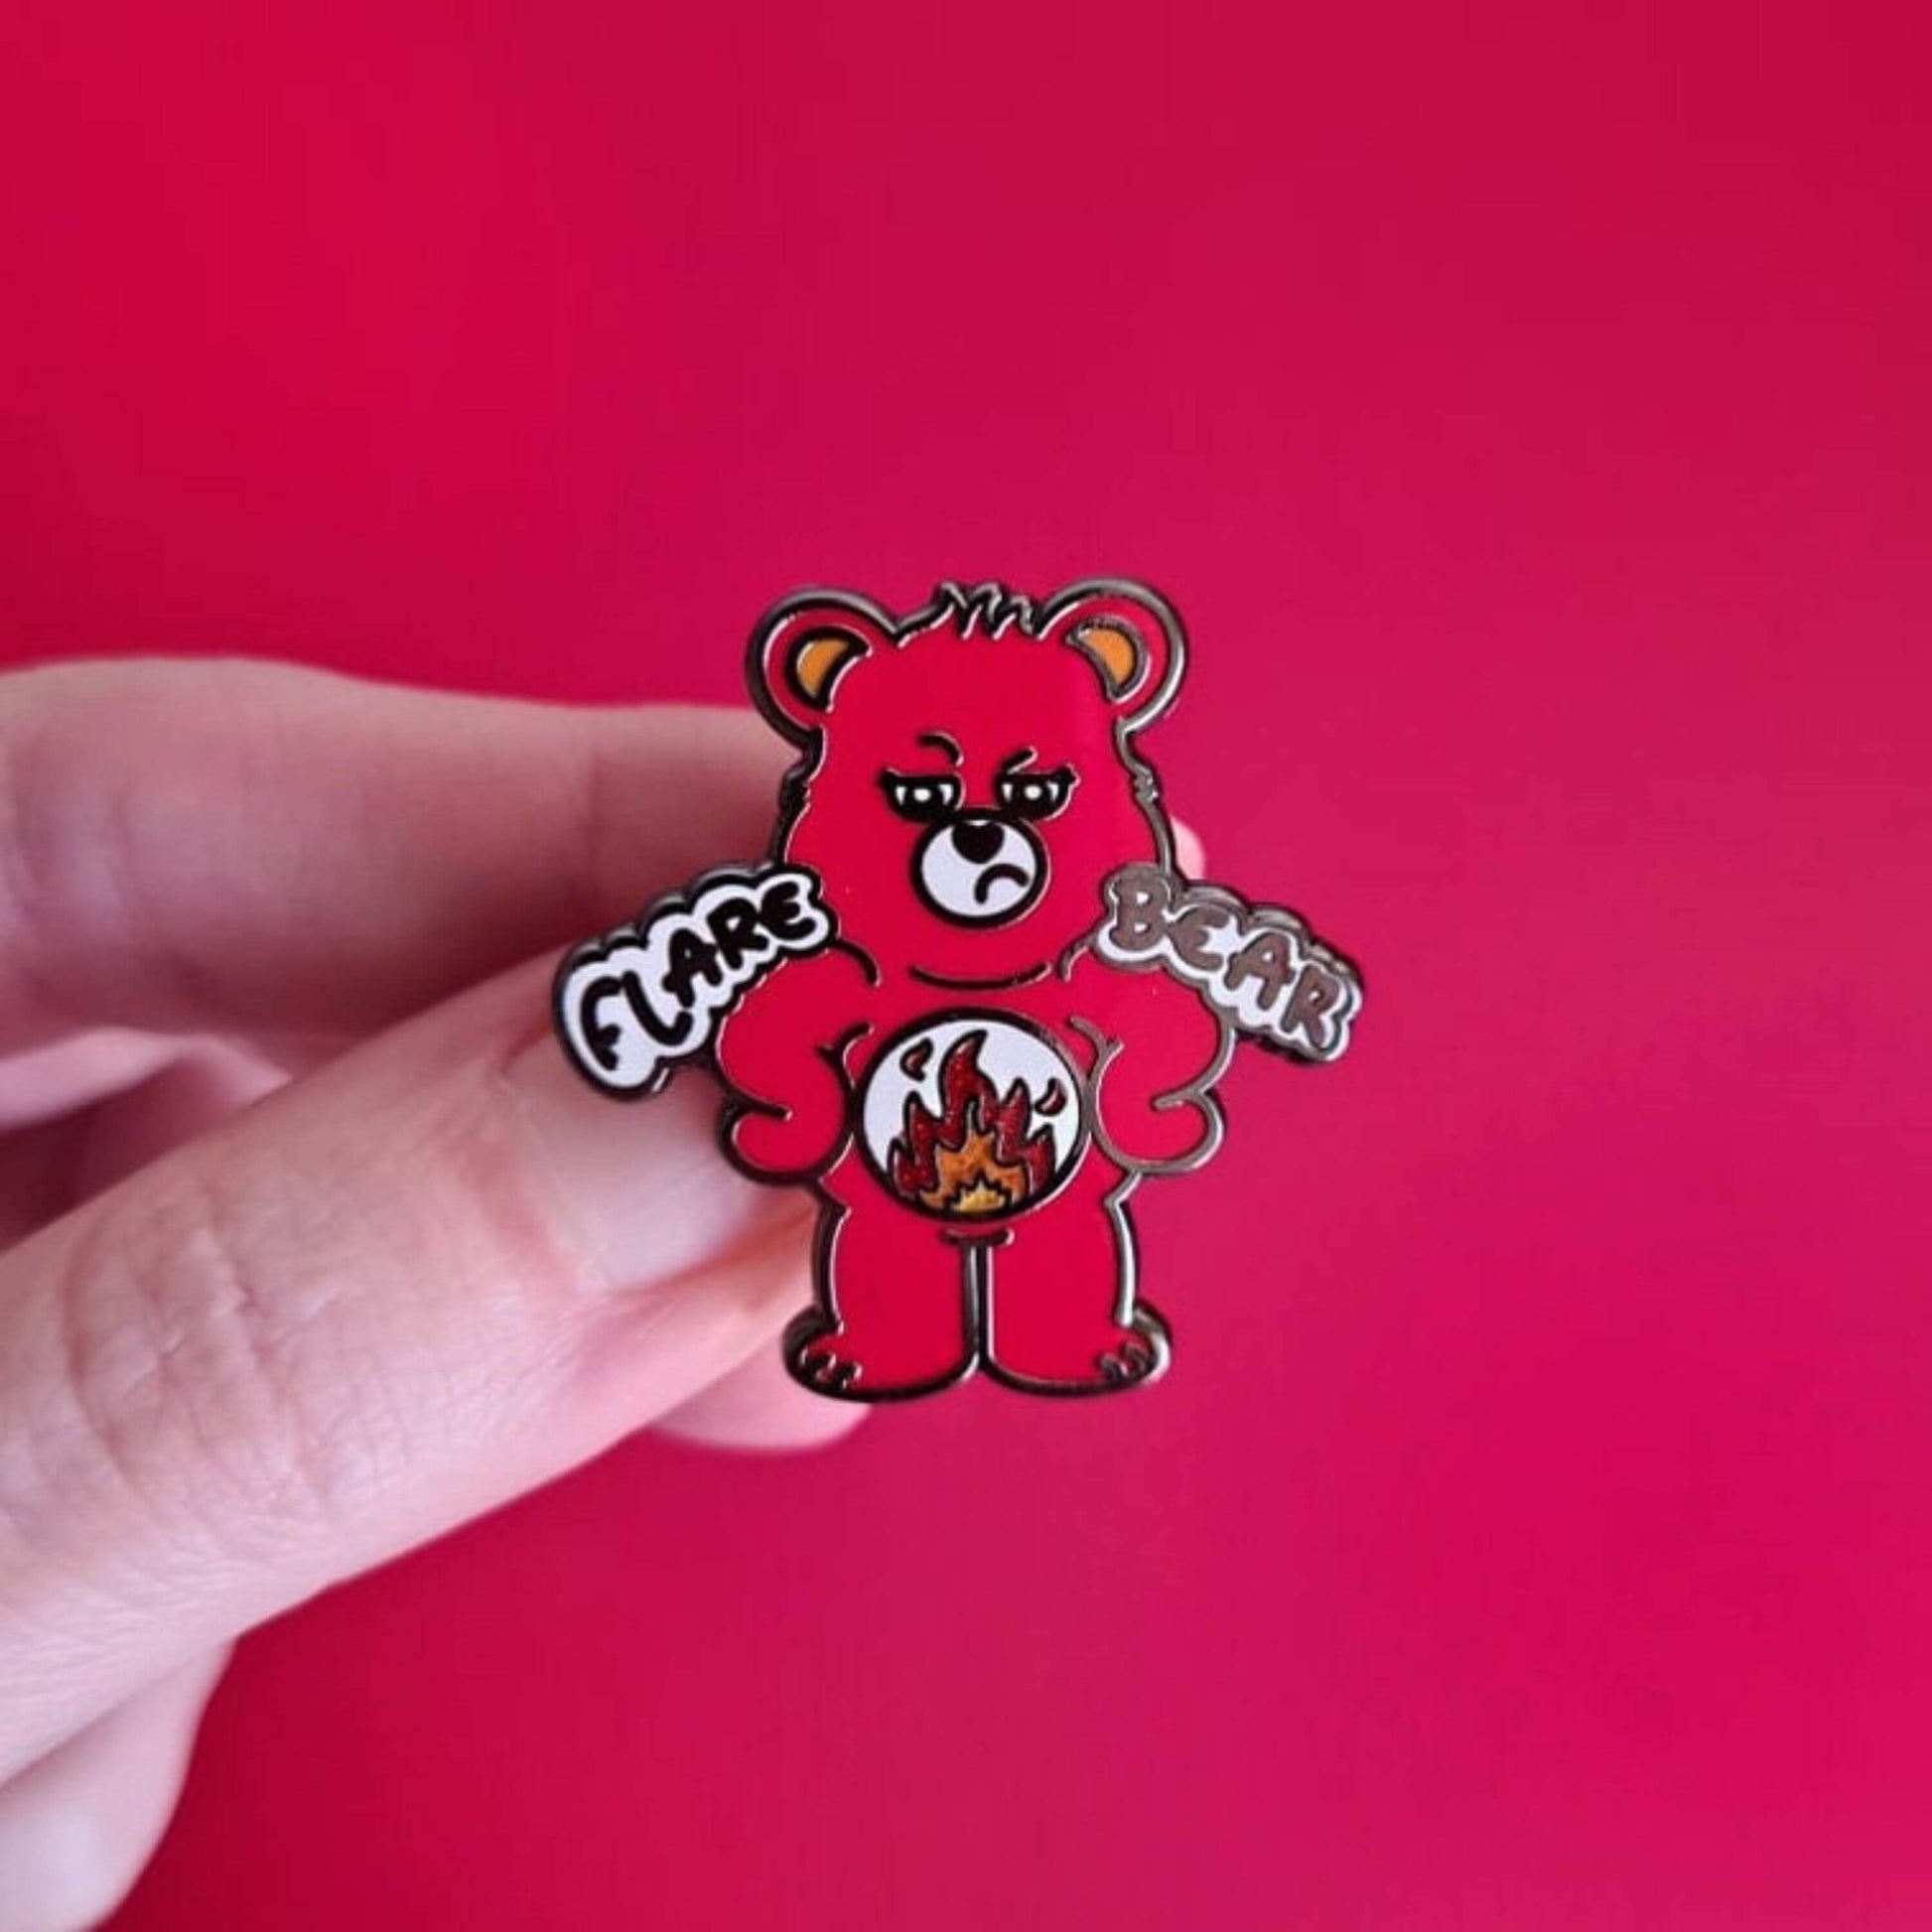 Flare Bear enamel pin shown held by a hand in front of a red background. The enamel pin is of a red bear with a fed up expression and hands on its hips. There is a white circle on its belly with flames inside. Flare Bear is written on the pin. The enamel pin is designed to raise awareness for chronic illness flare ups.